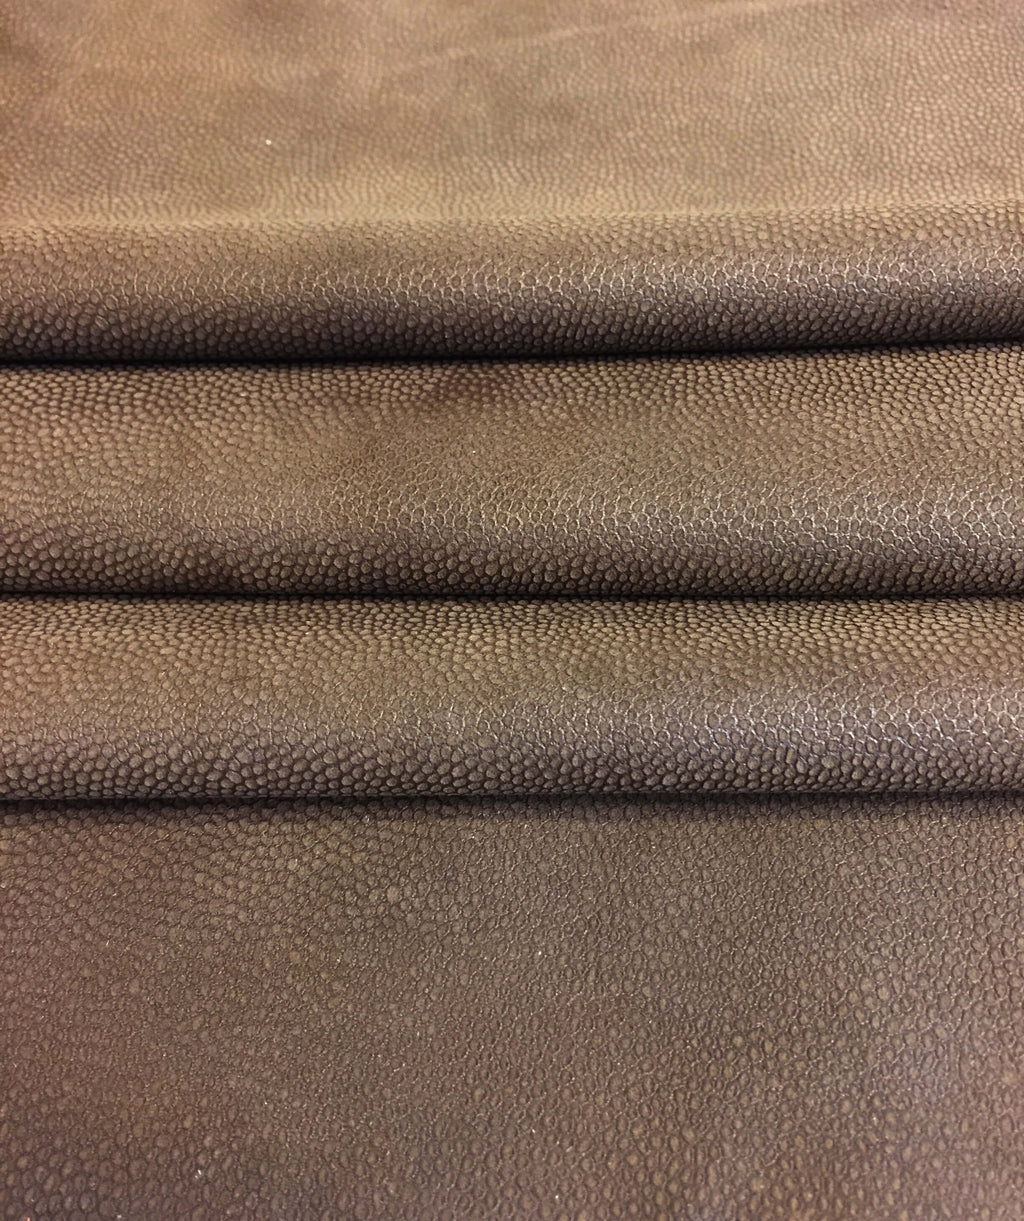 Lambskin Genuine Leather Animal Hides Brown Suede Craft and DIY Projects